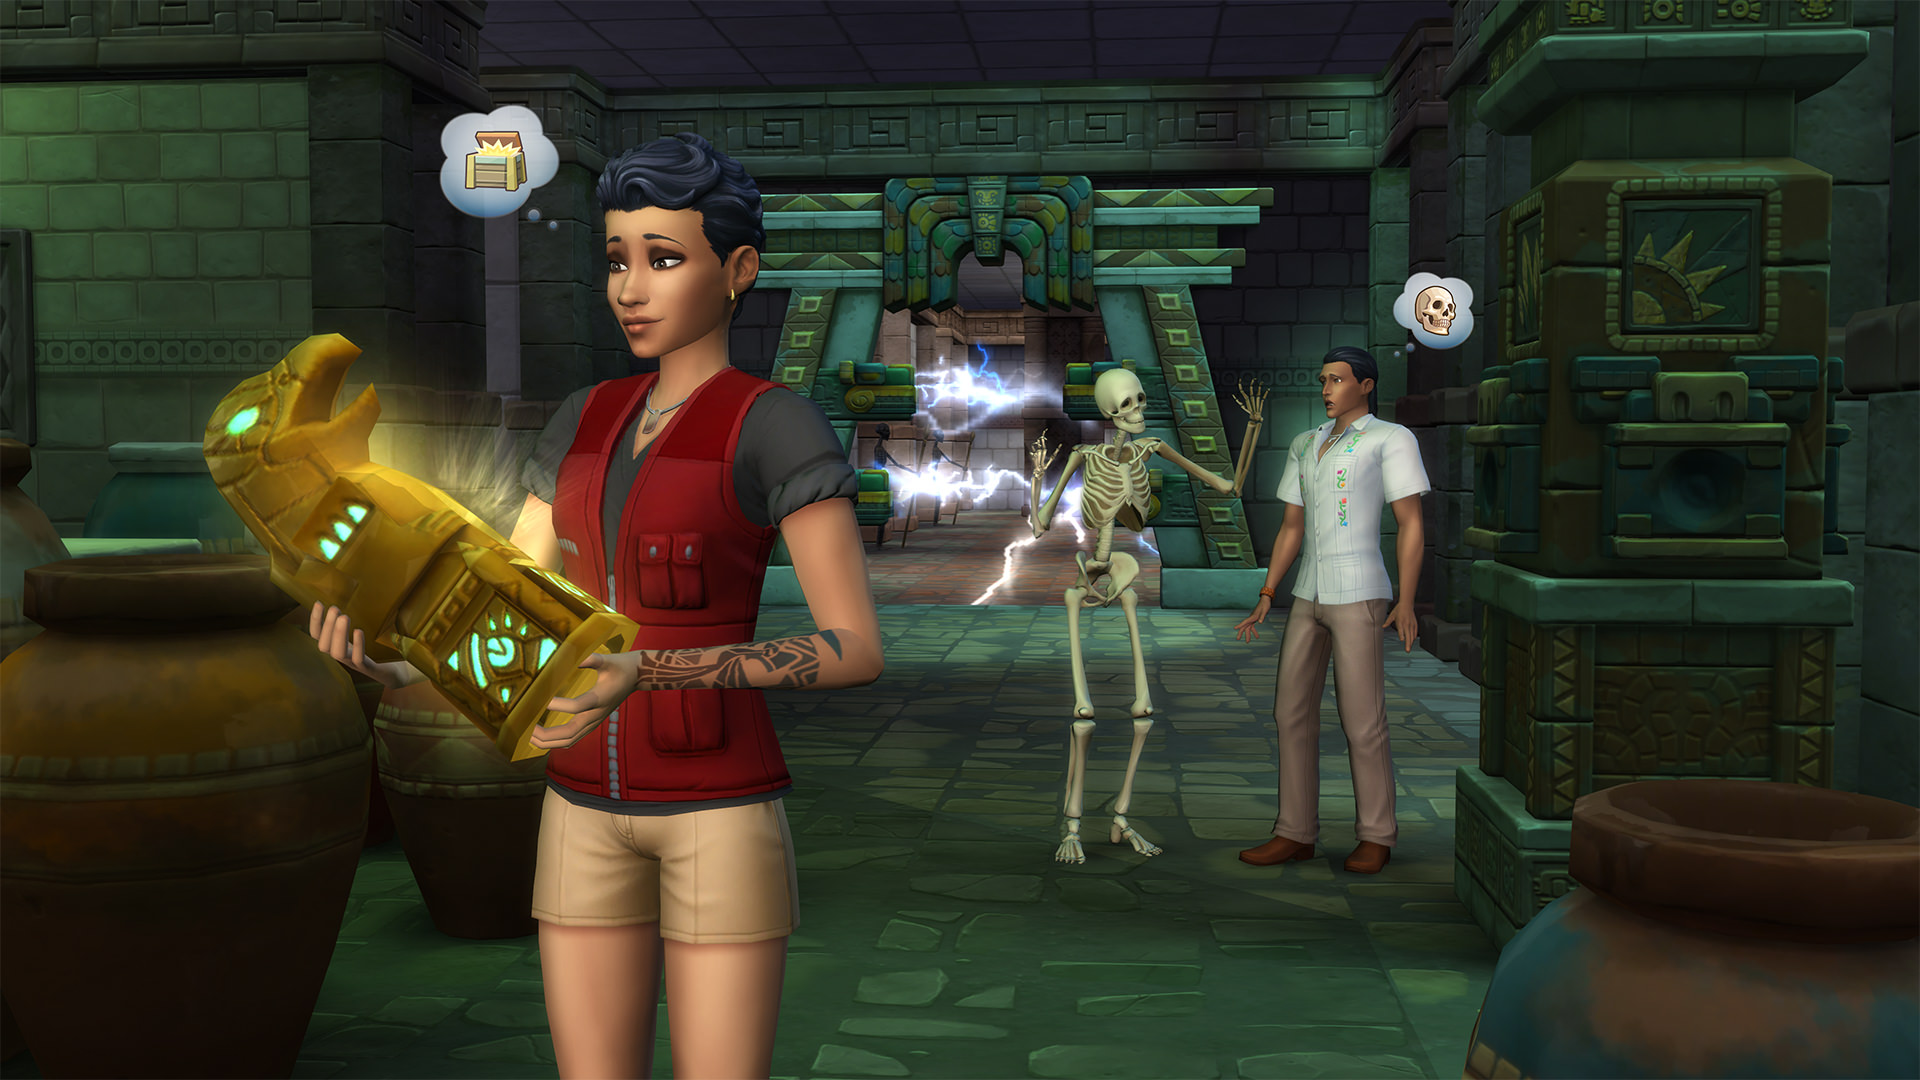 The Sims 4 Adventures screenshot showing a Sim analyzing an ancient artefact while another faces a skeleton.